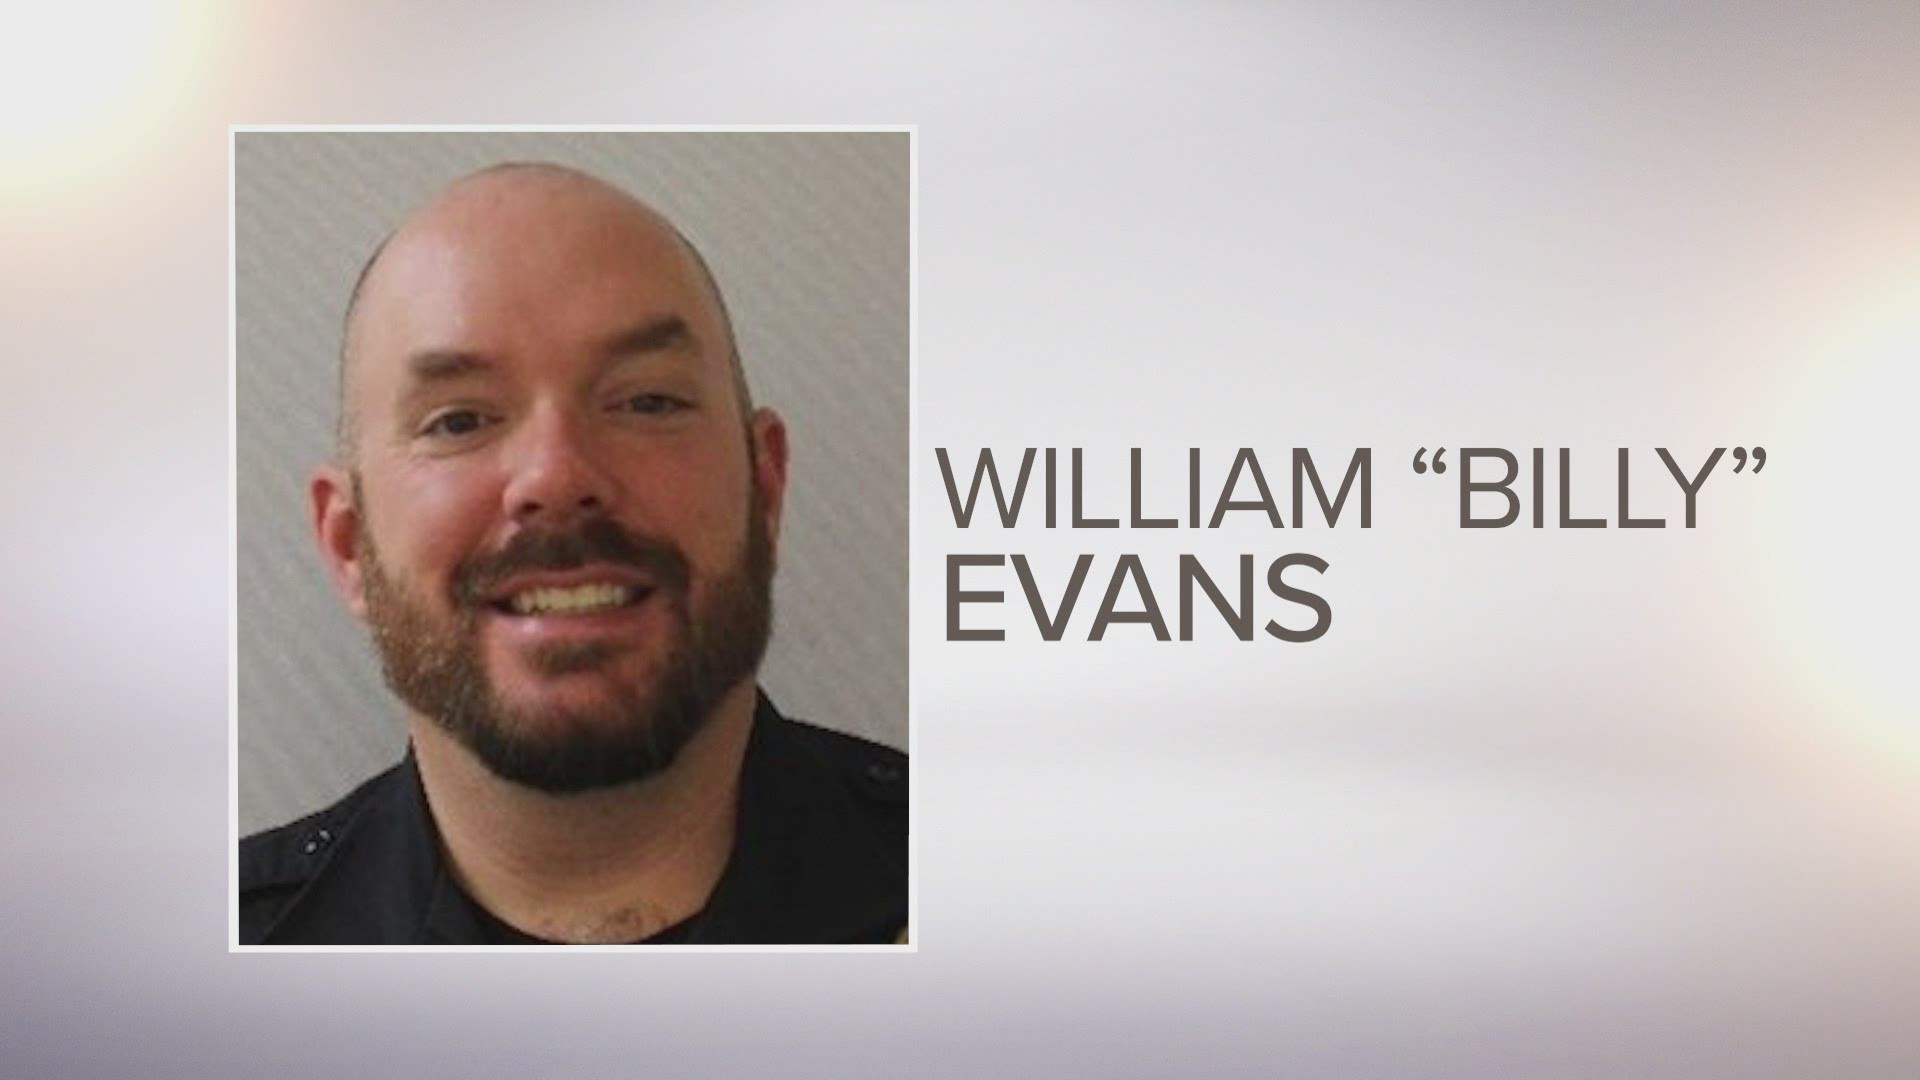 Acting U.S. Capitol Police Chief Yogananda Pittman identified Officer William 'Billy' Evans as the officer who died in Friday's attack.